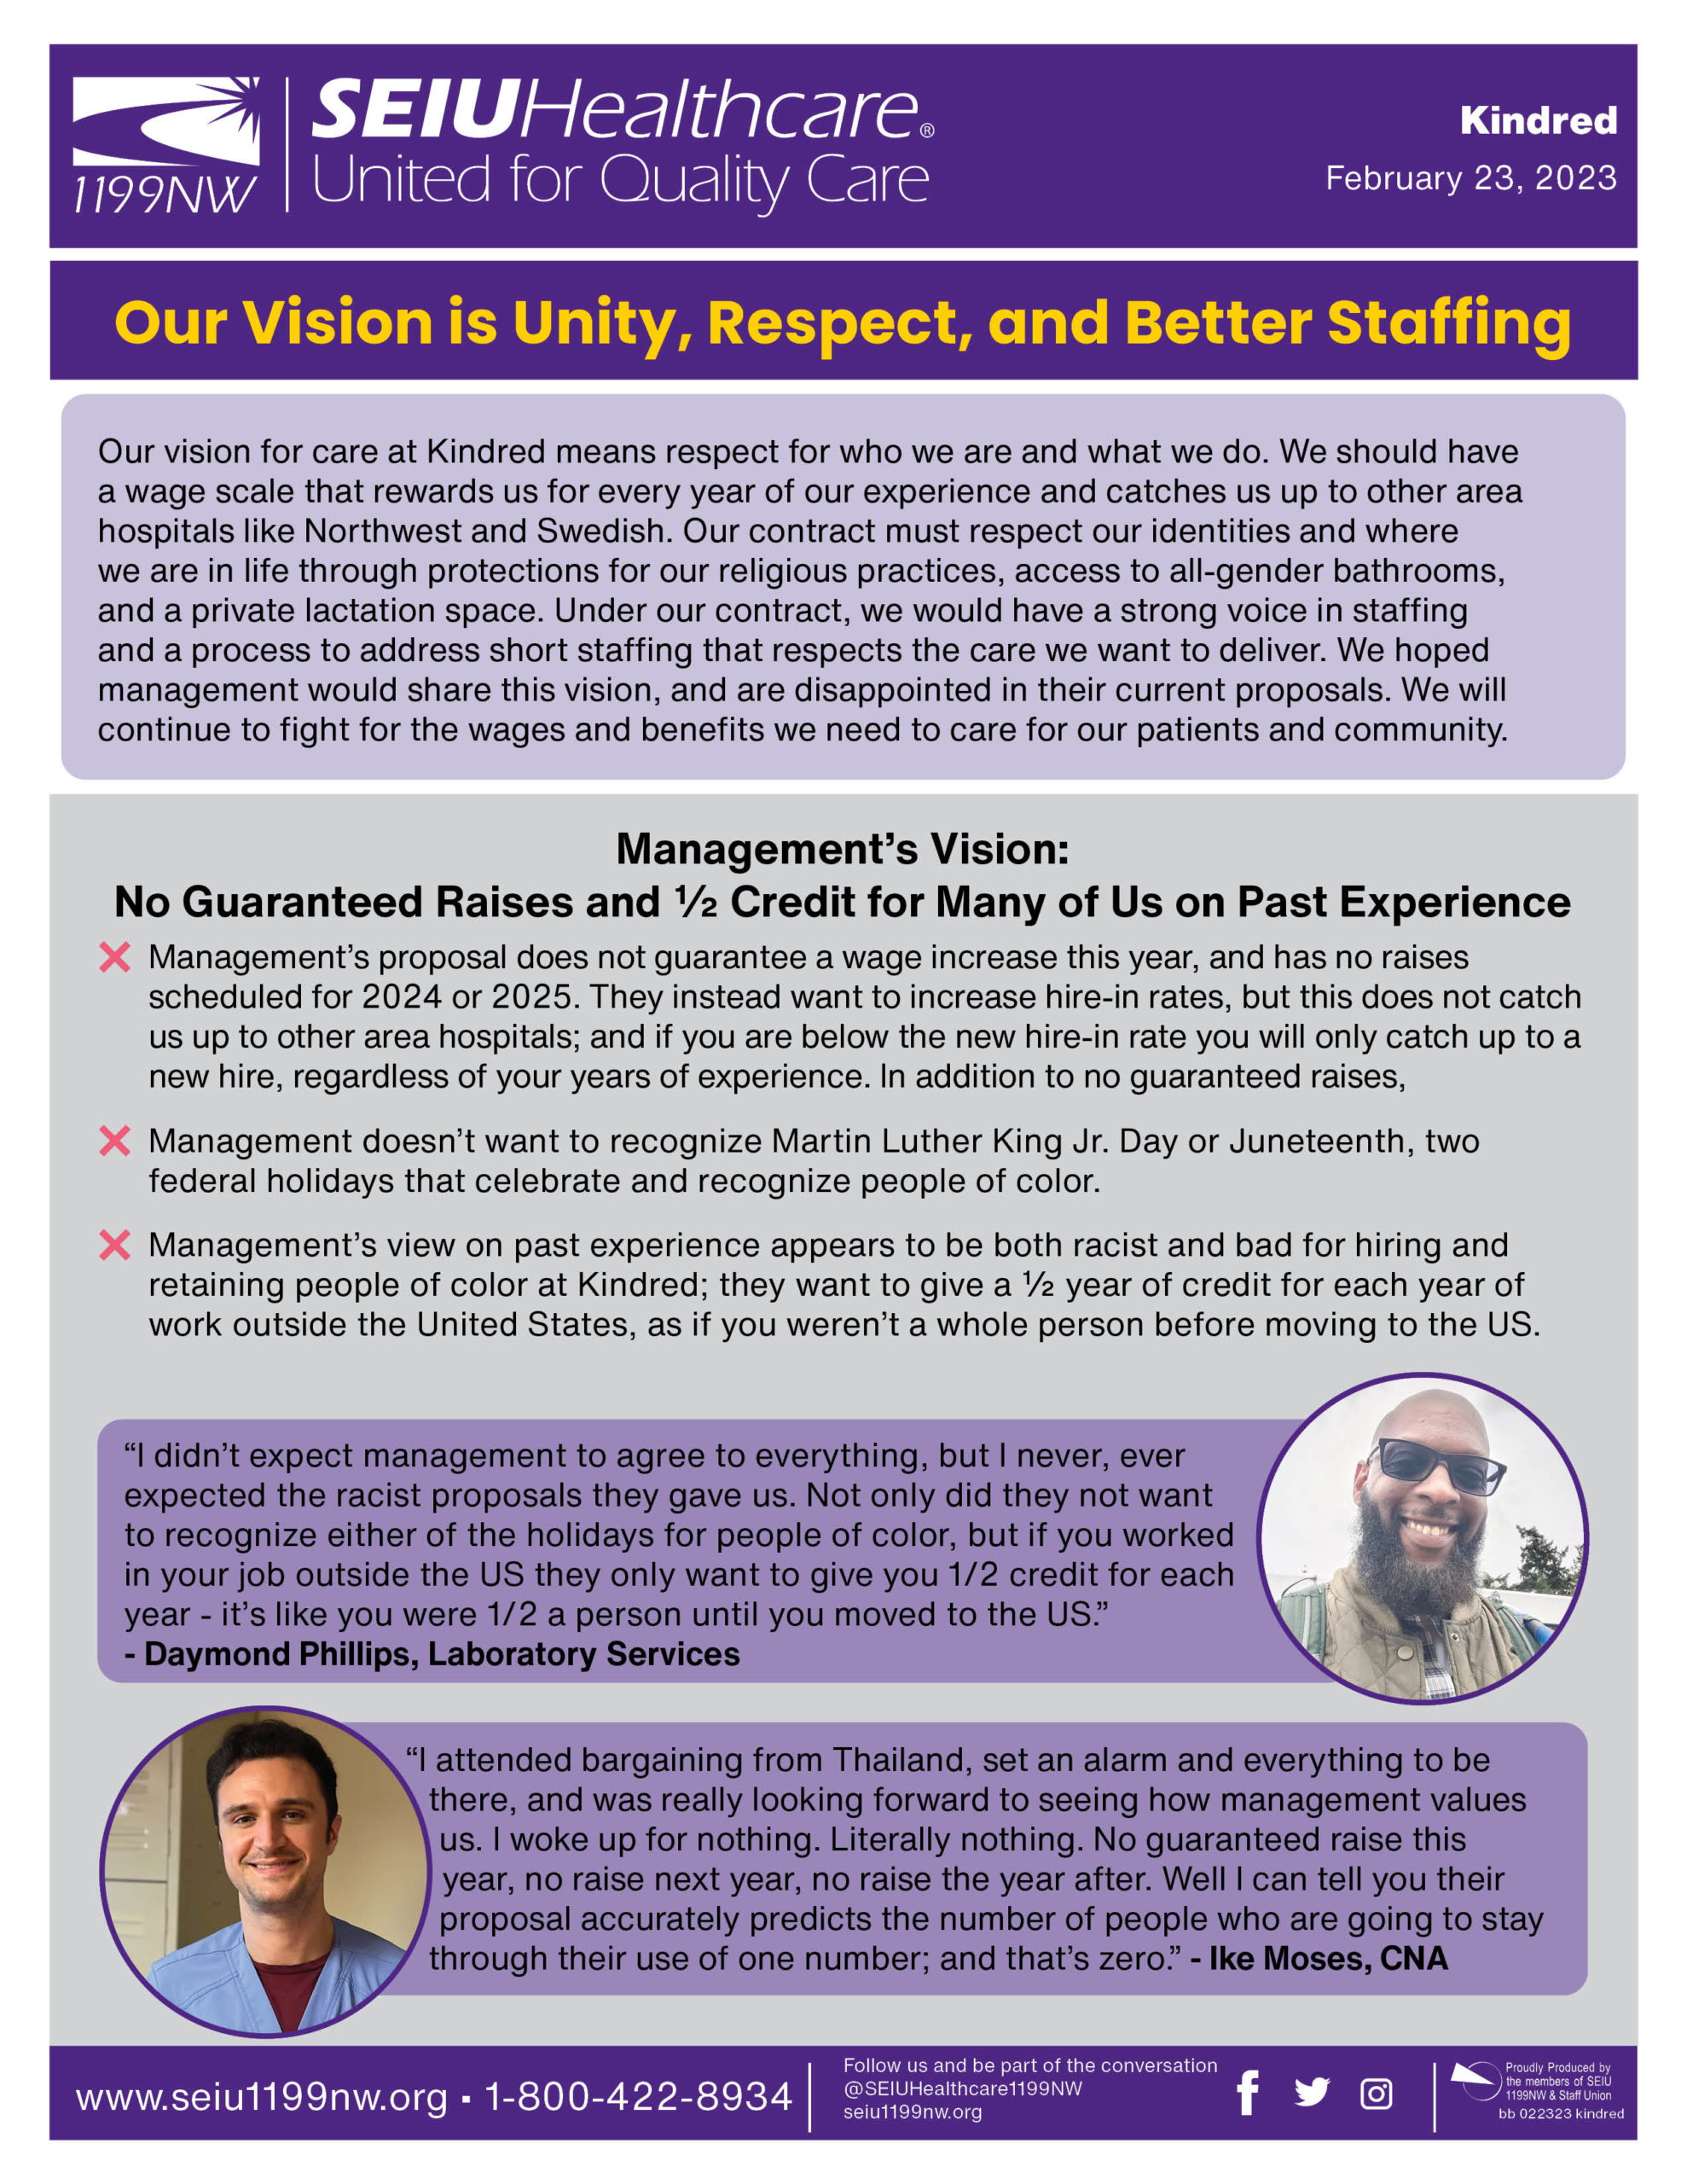 Our Vision is Unity, Respect, and Better Staffing